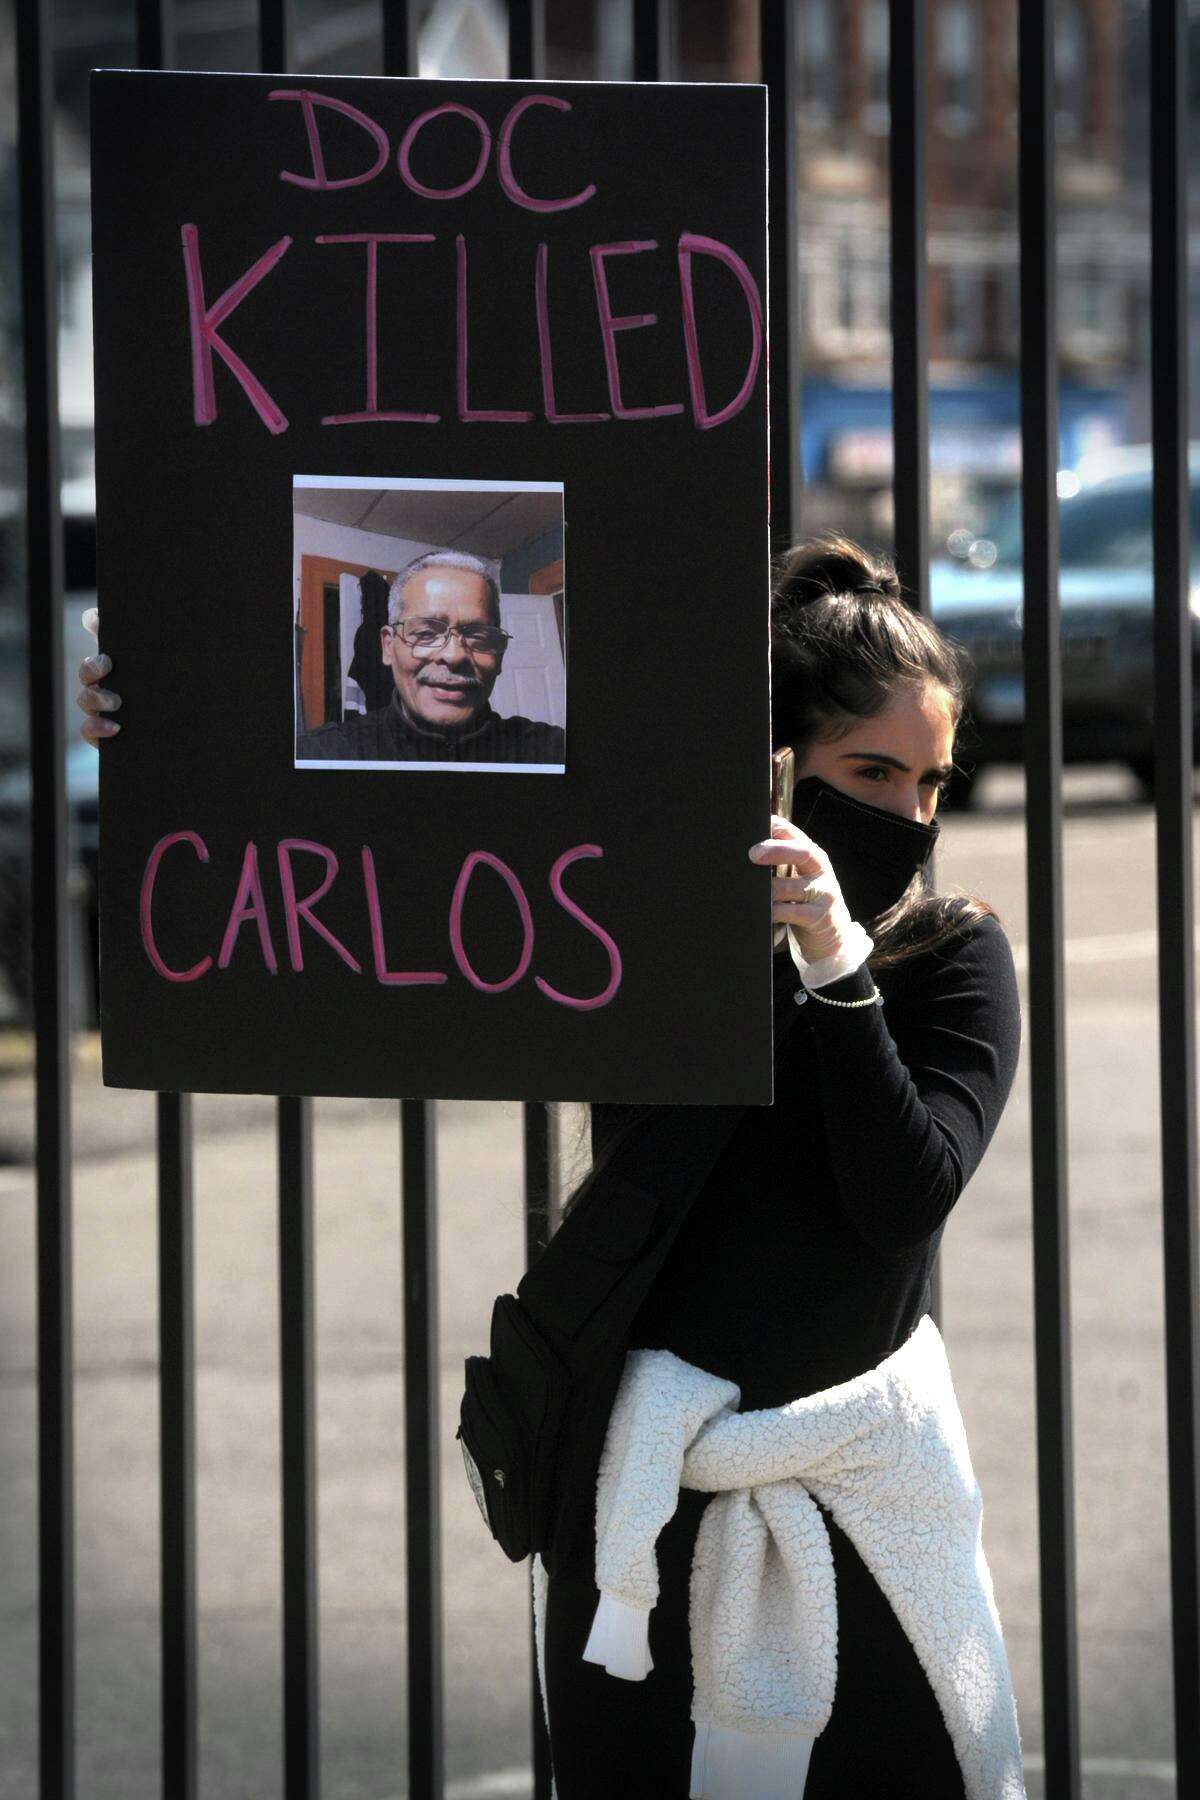 A woman holds a poster with the image of Carlos DeLeon during a protest outside the Bridgeport Correctional Center, in Bridgeport, Conn. April 15, 2020. DeLeon, an inmate from Bridgeport, died in a state prison after contracting coronavirus.